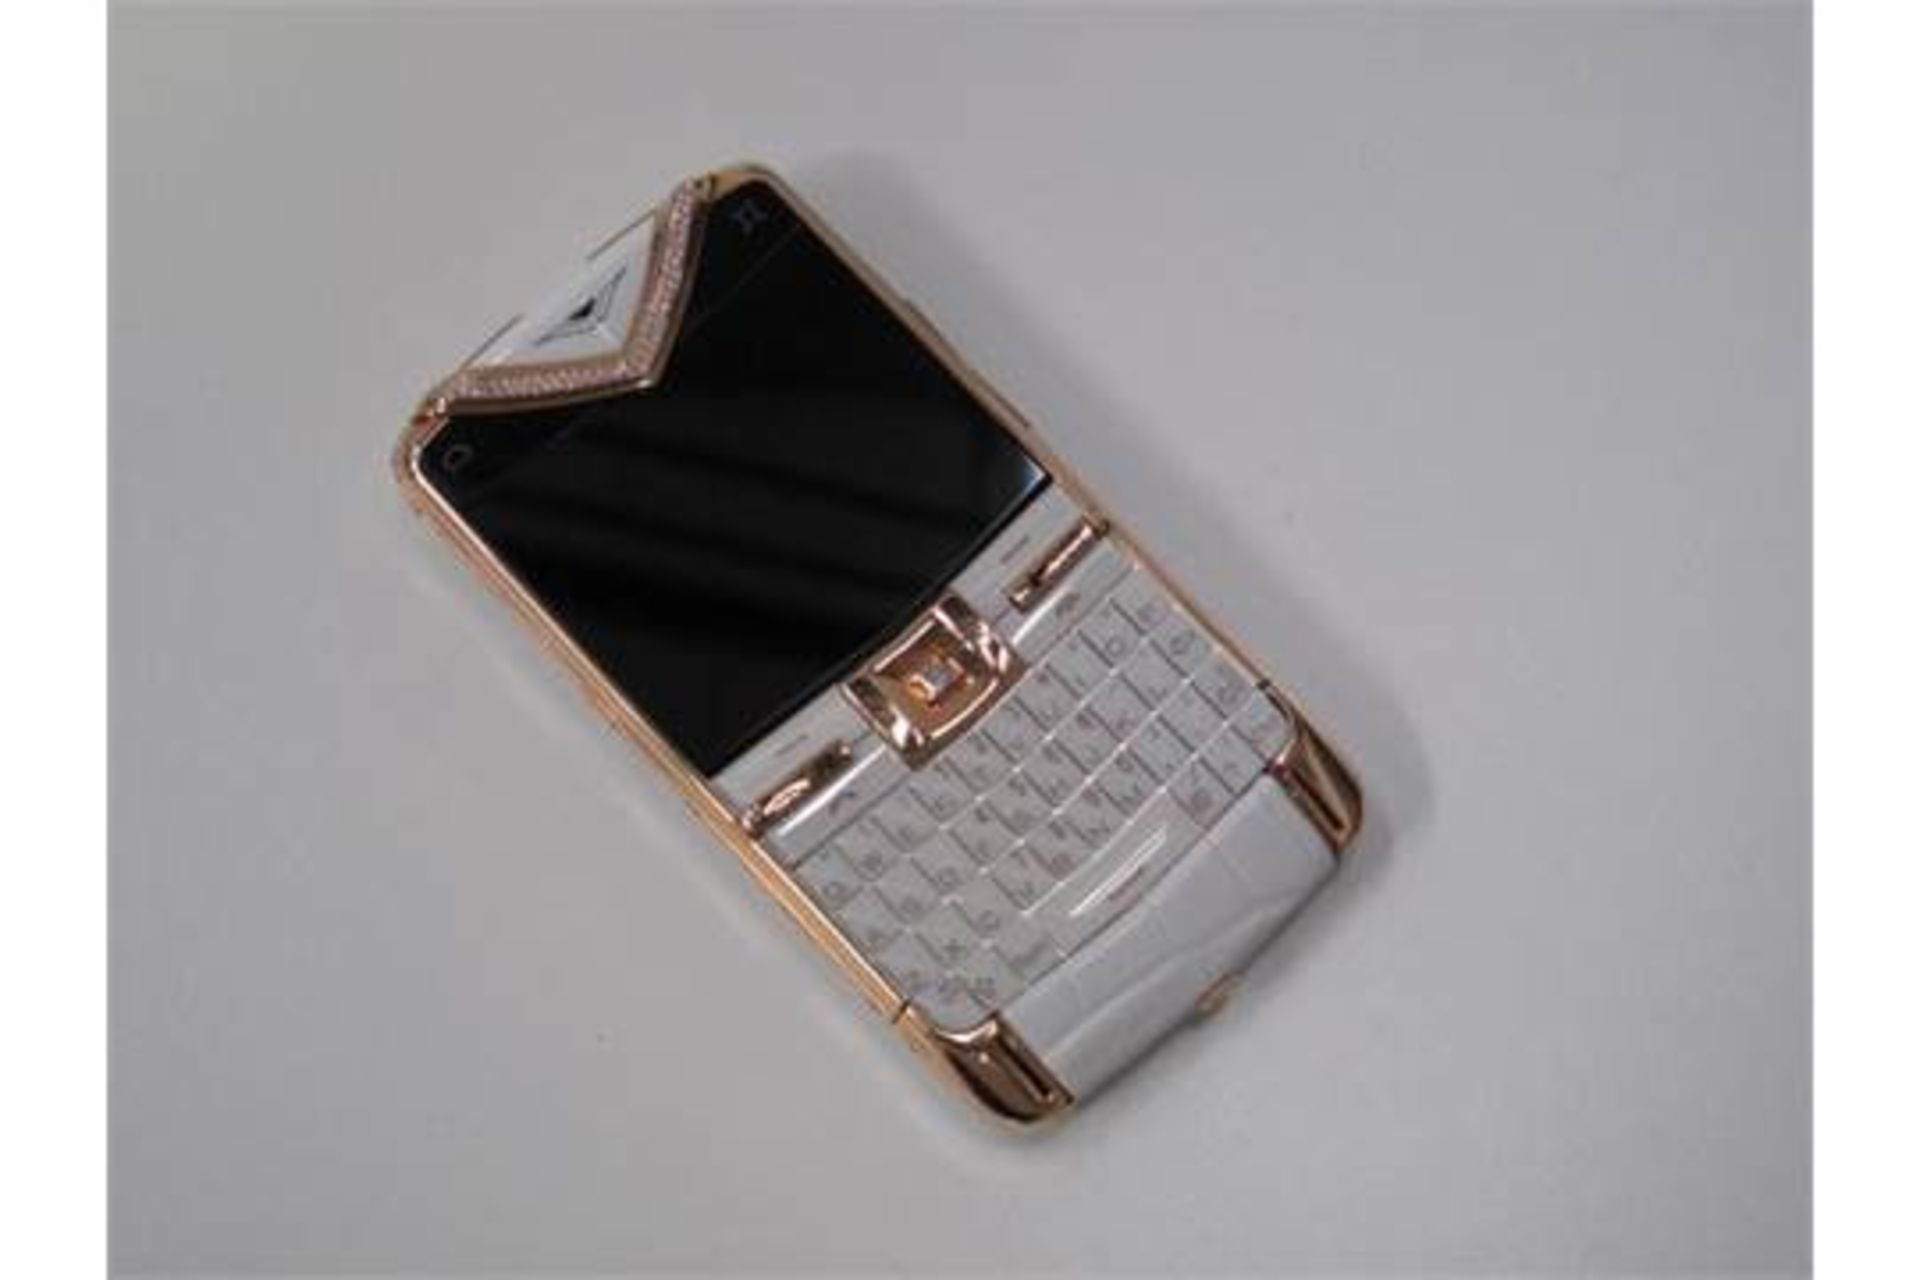 Re-Offered Due to Default by Buyer: Vertu Constellation Quest 18ct Red Gold